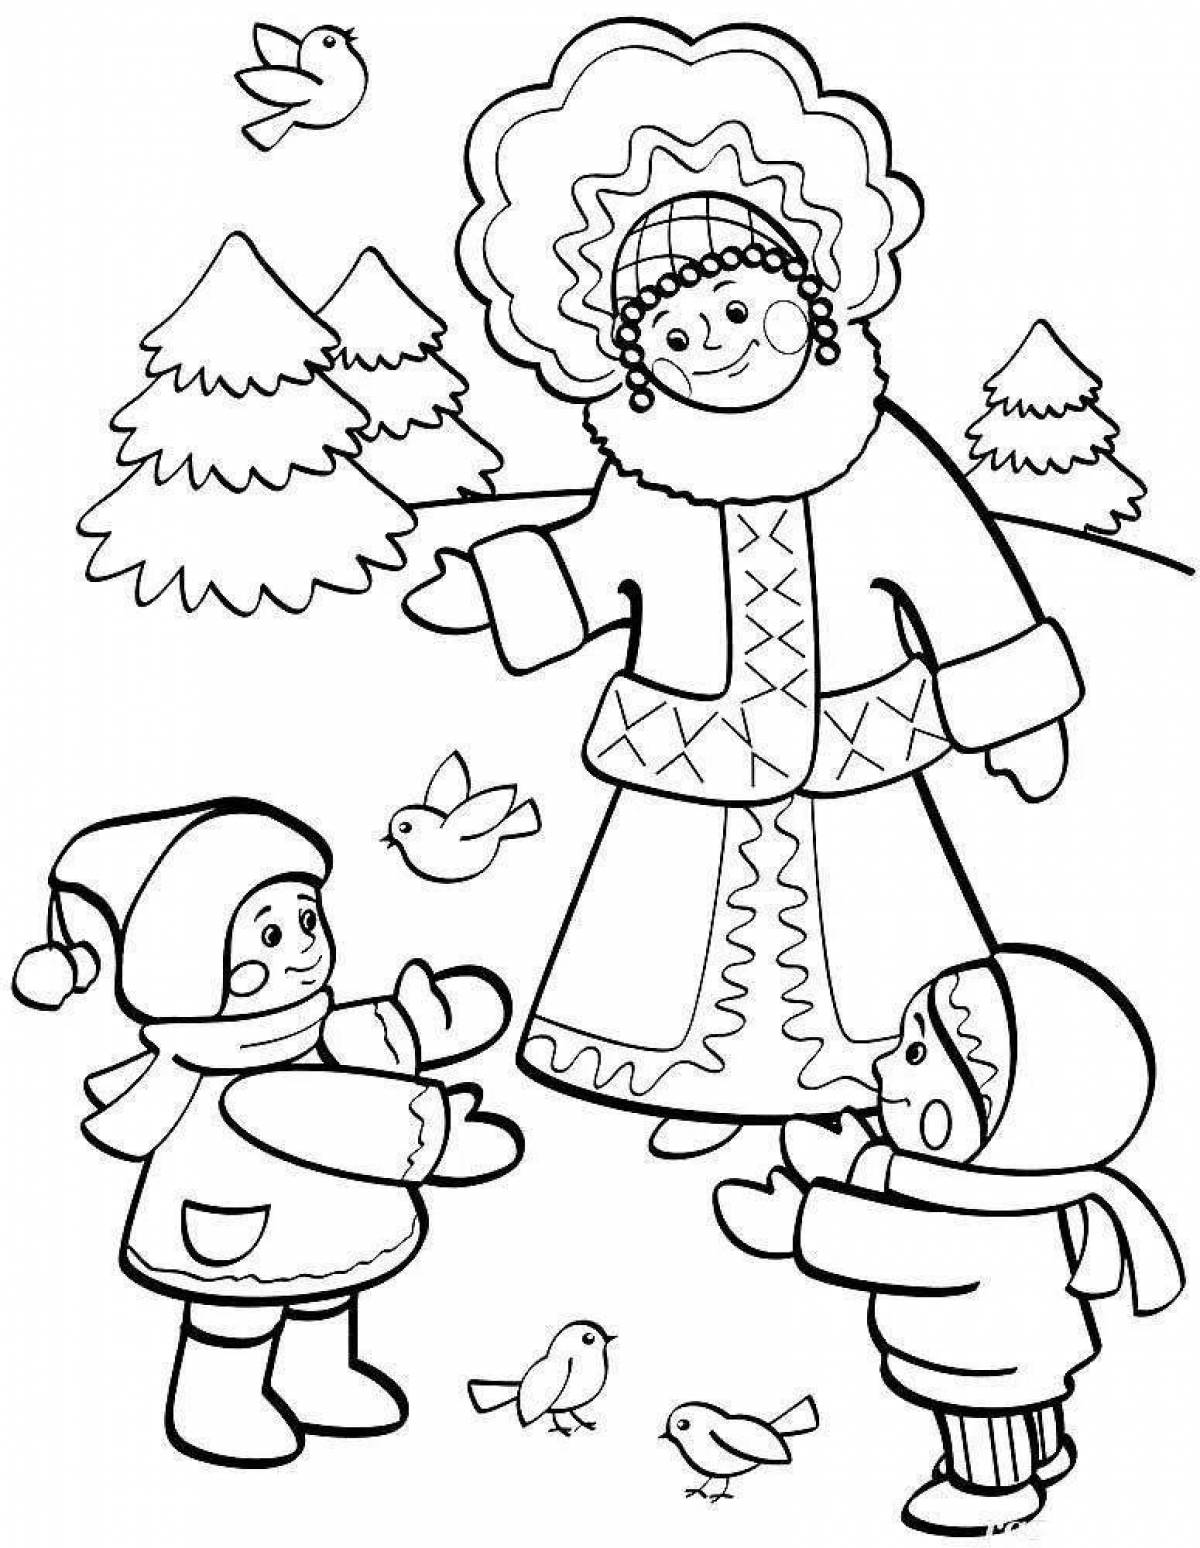 Colorful kindergarten group coloring page